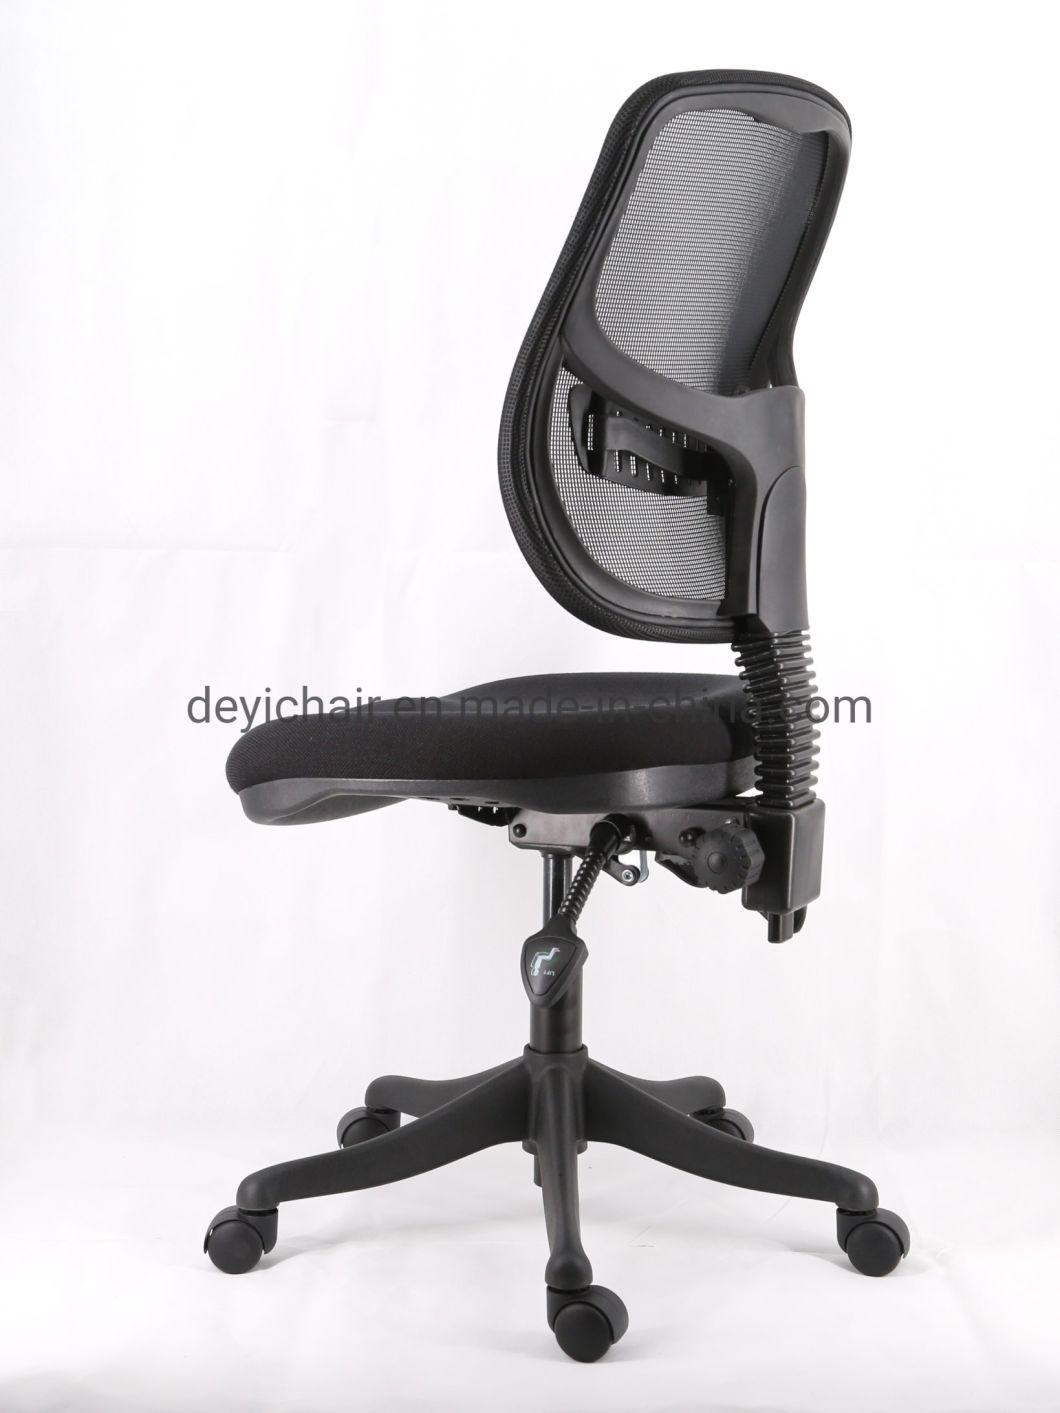 Lumbar Support Available Functional Mechanism Nylon Base Caster Mesh Fback Fabric Seat Compuer Office Chair